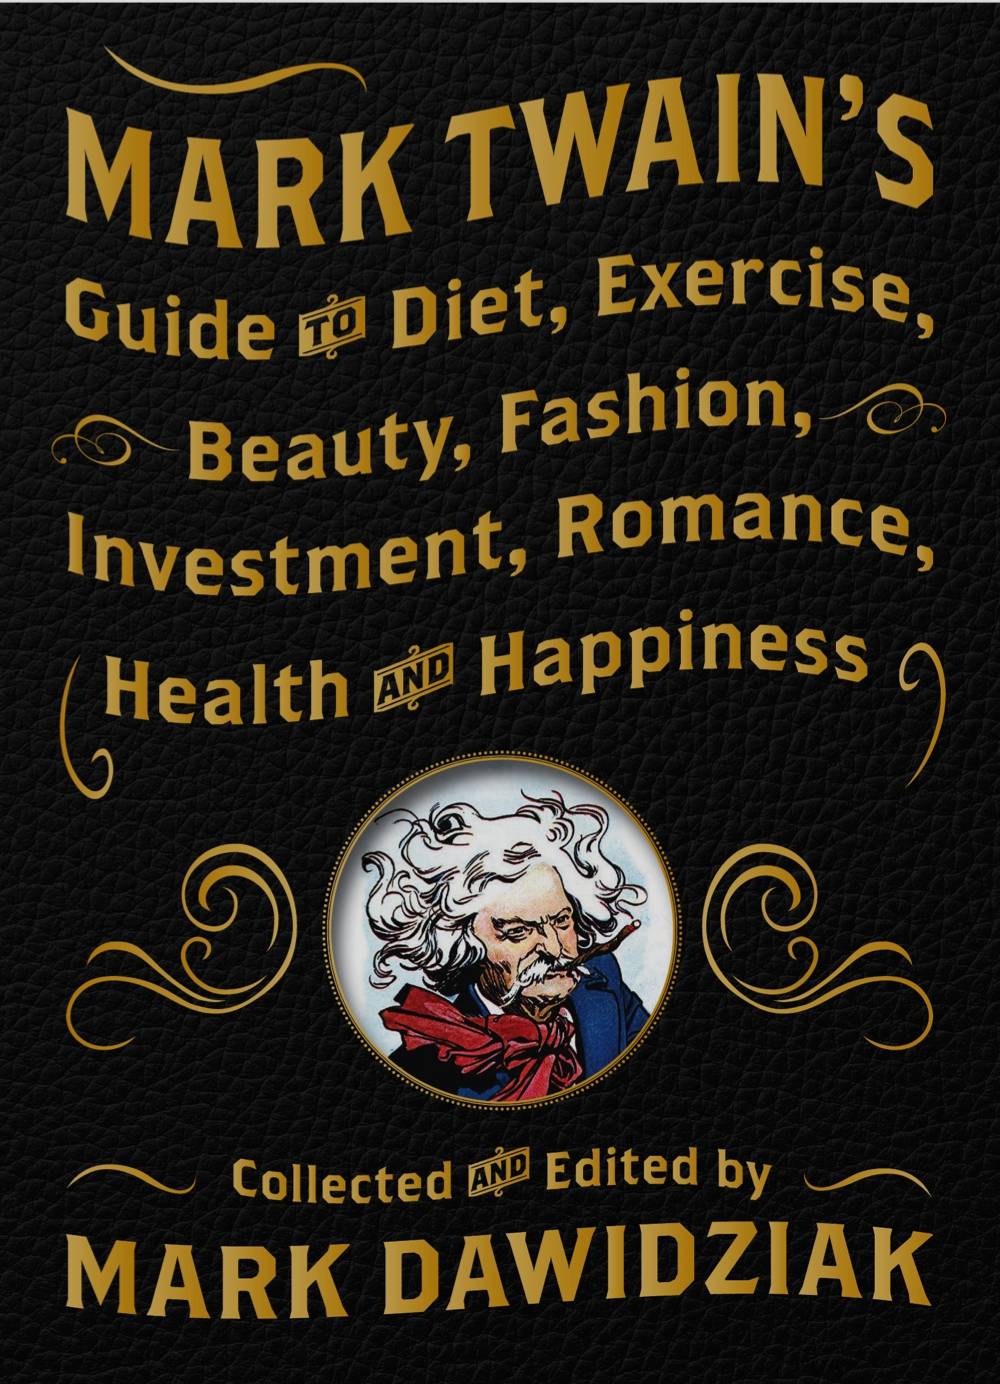 Mark Twain’s Guide to Diet, Exercise, Beauty, Fashion, Investment, Romance, Health & Happiness